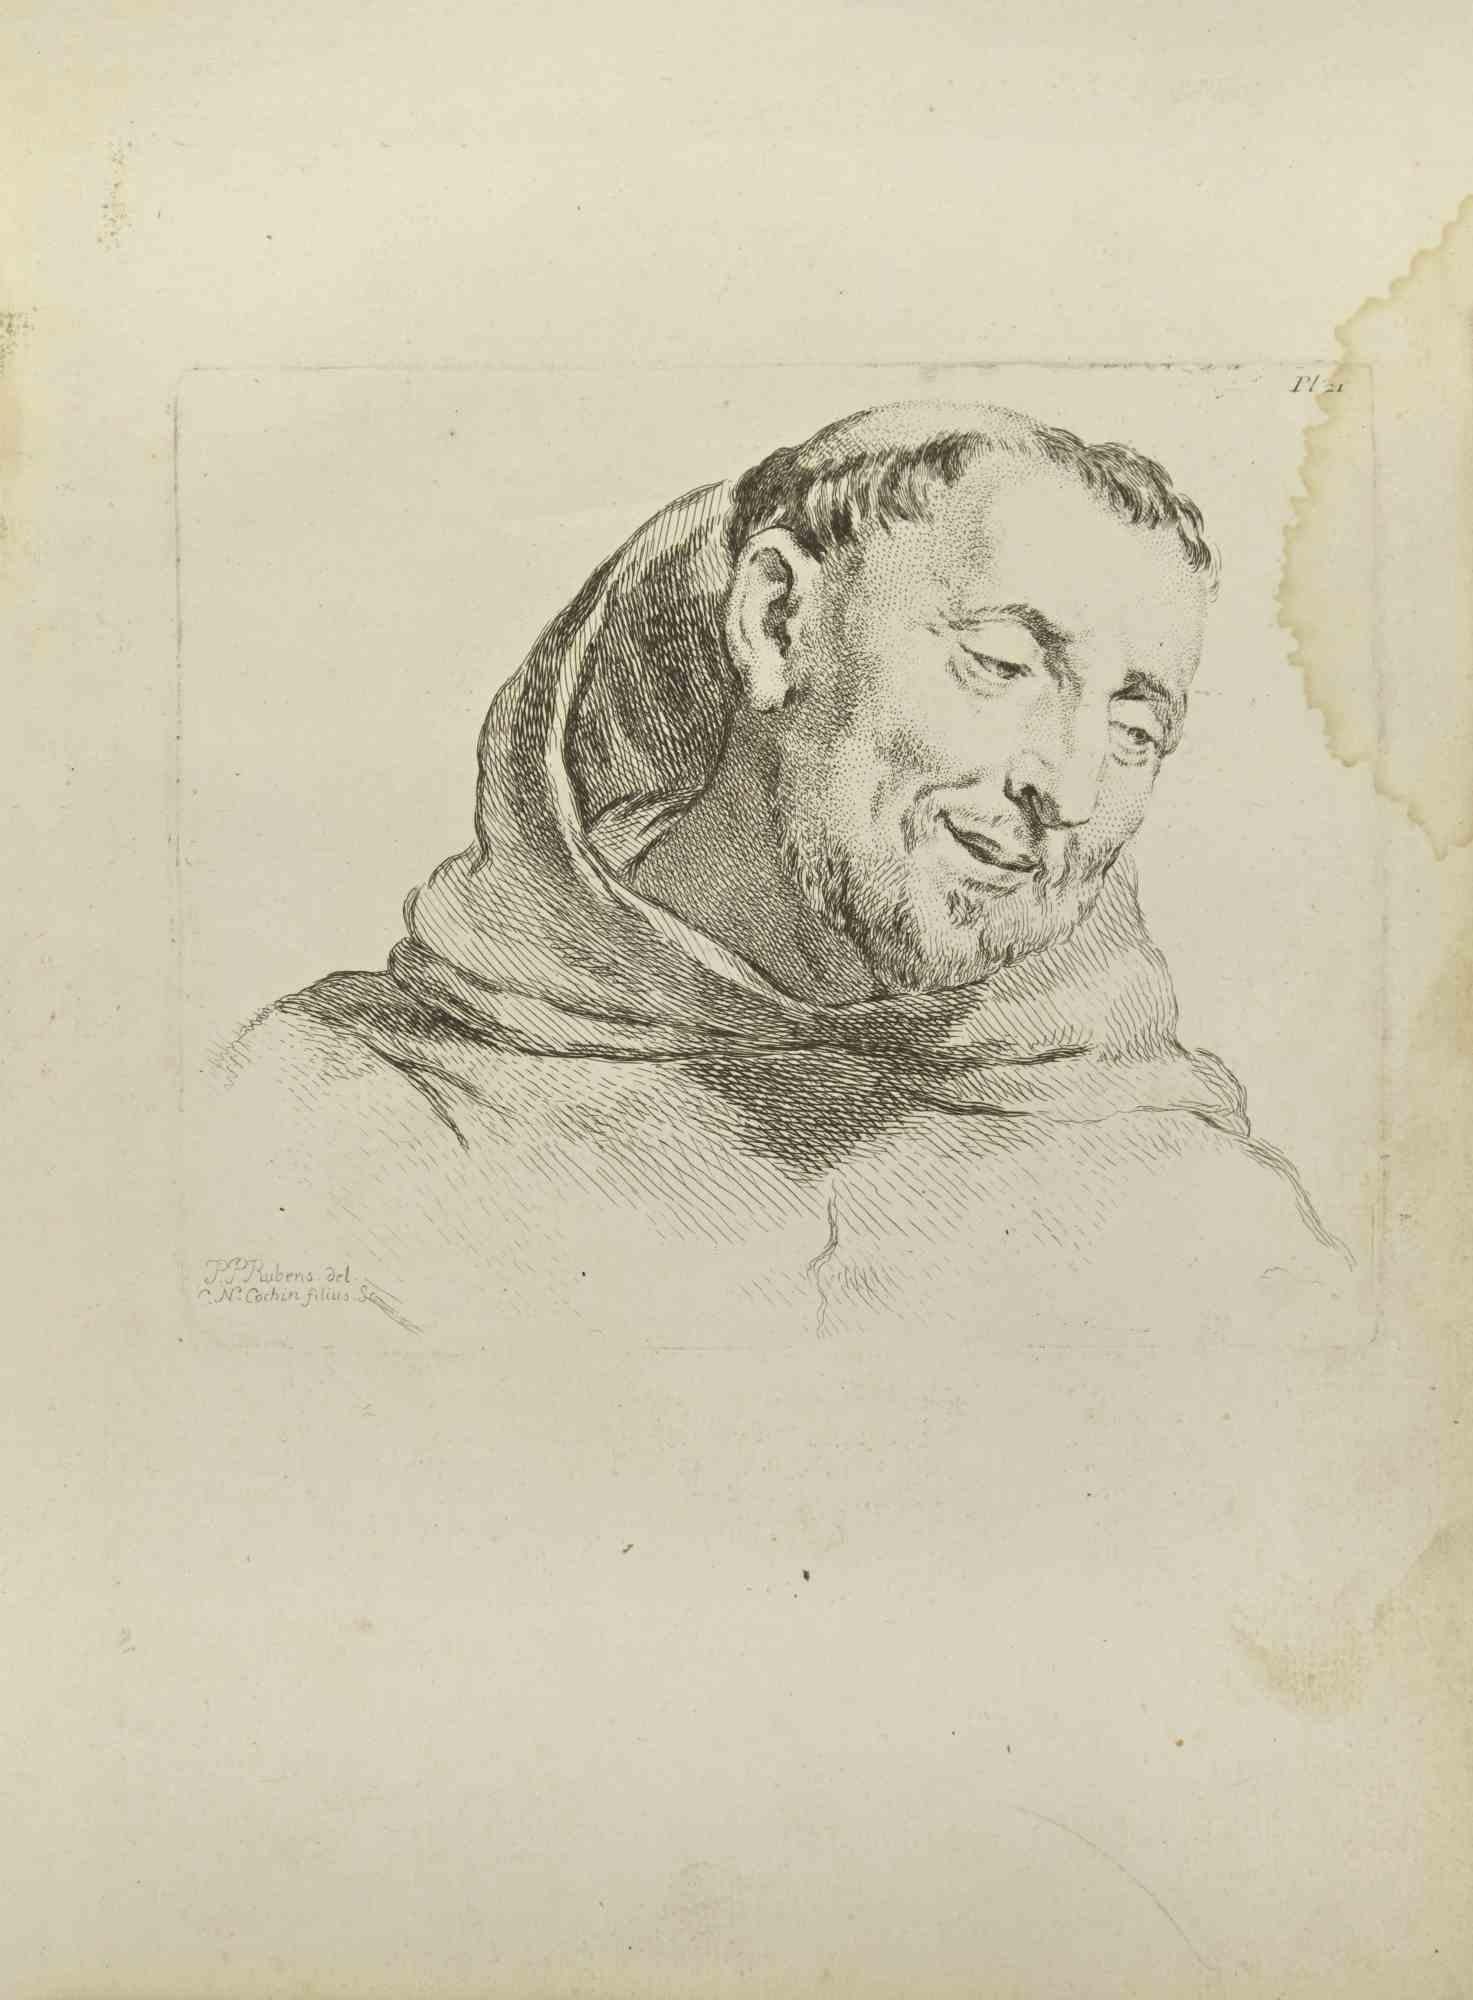 Portrait after Rubens is an etching realized by Nicholas Cochin in 1755.

Signed in the plate.

Good conditions with foxing and a stain on the right margin.

The artwork is depicted through confident strokes.

The etching was realized for the